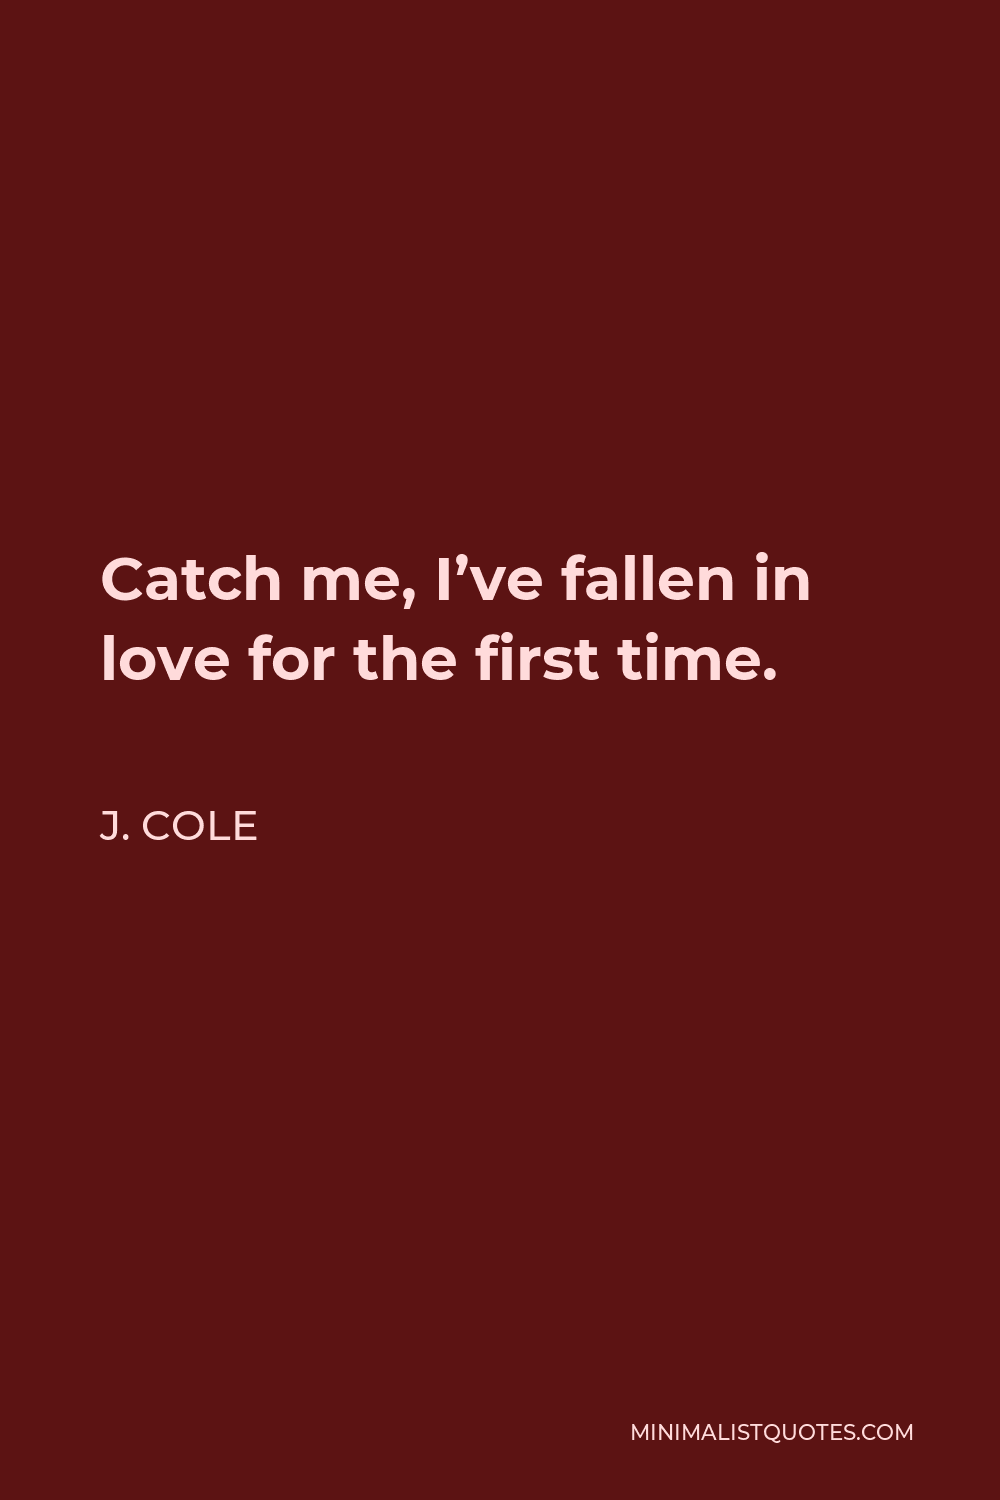 J. Cole Quote - Catch me, I’ve fallen in love for the first time.